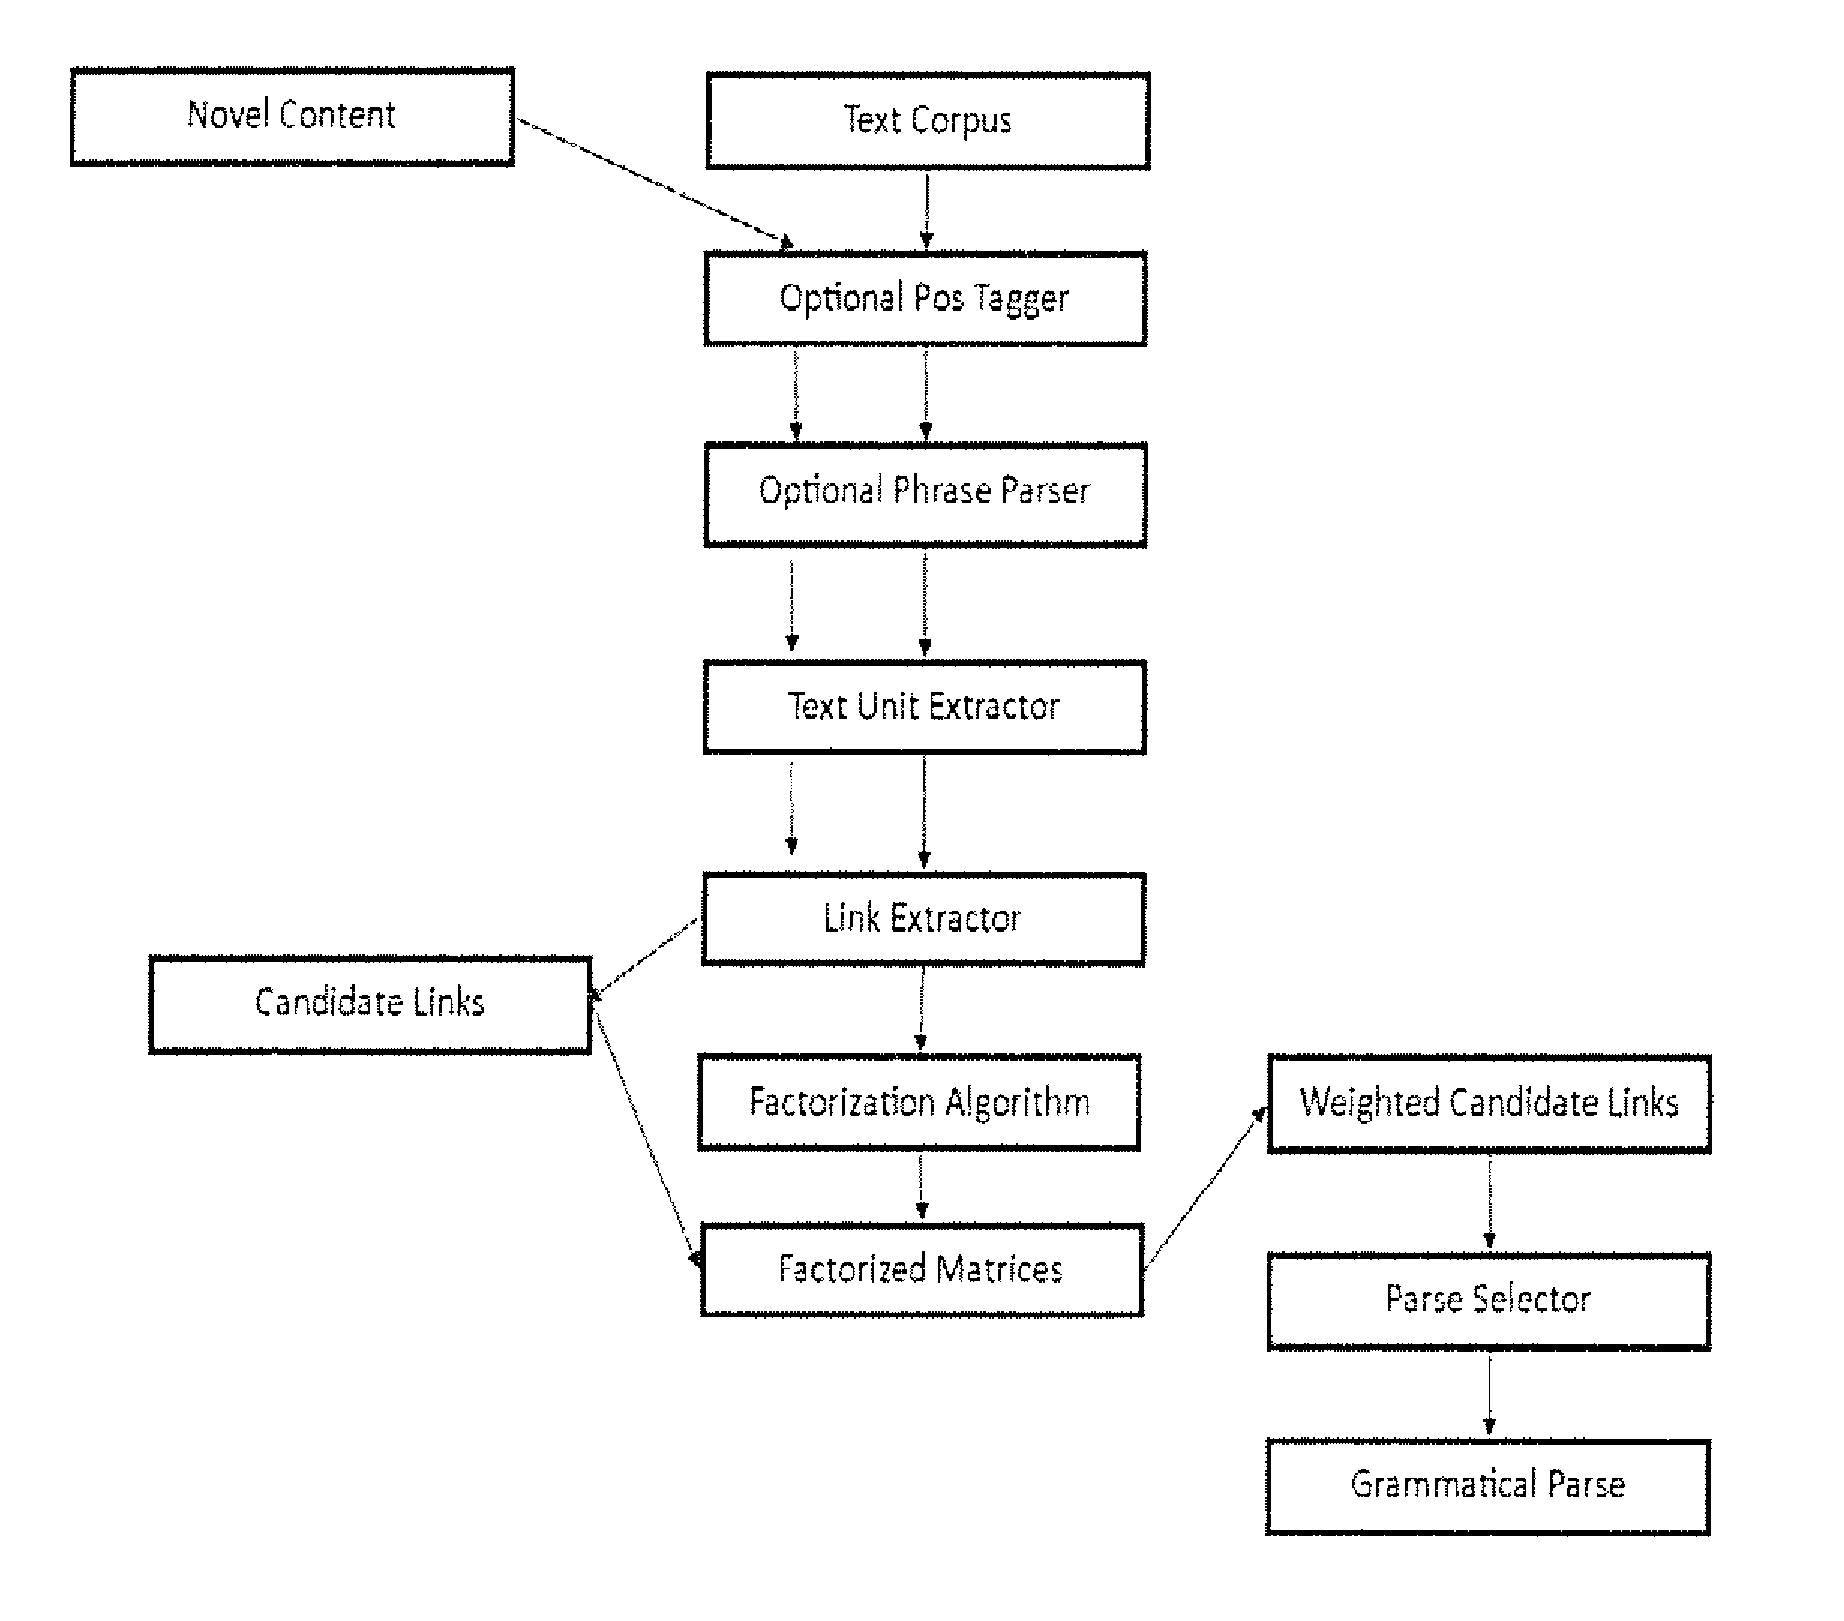 Method for unsupervised learning of grammatical parsers